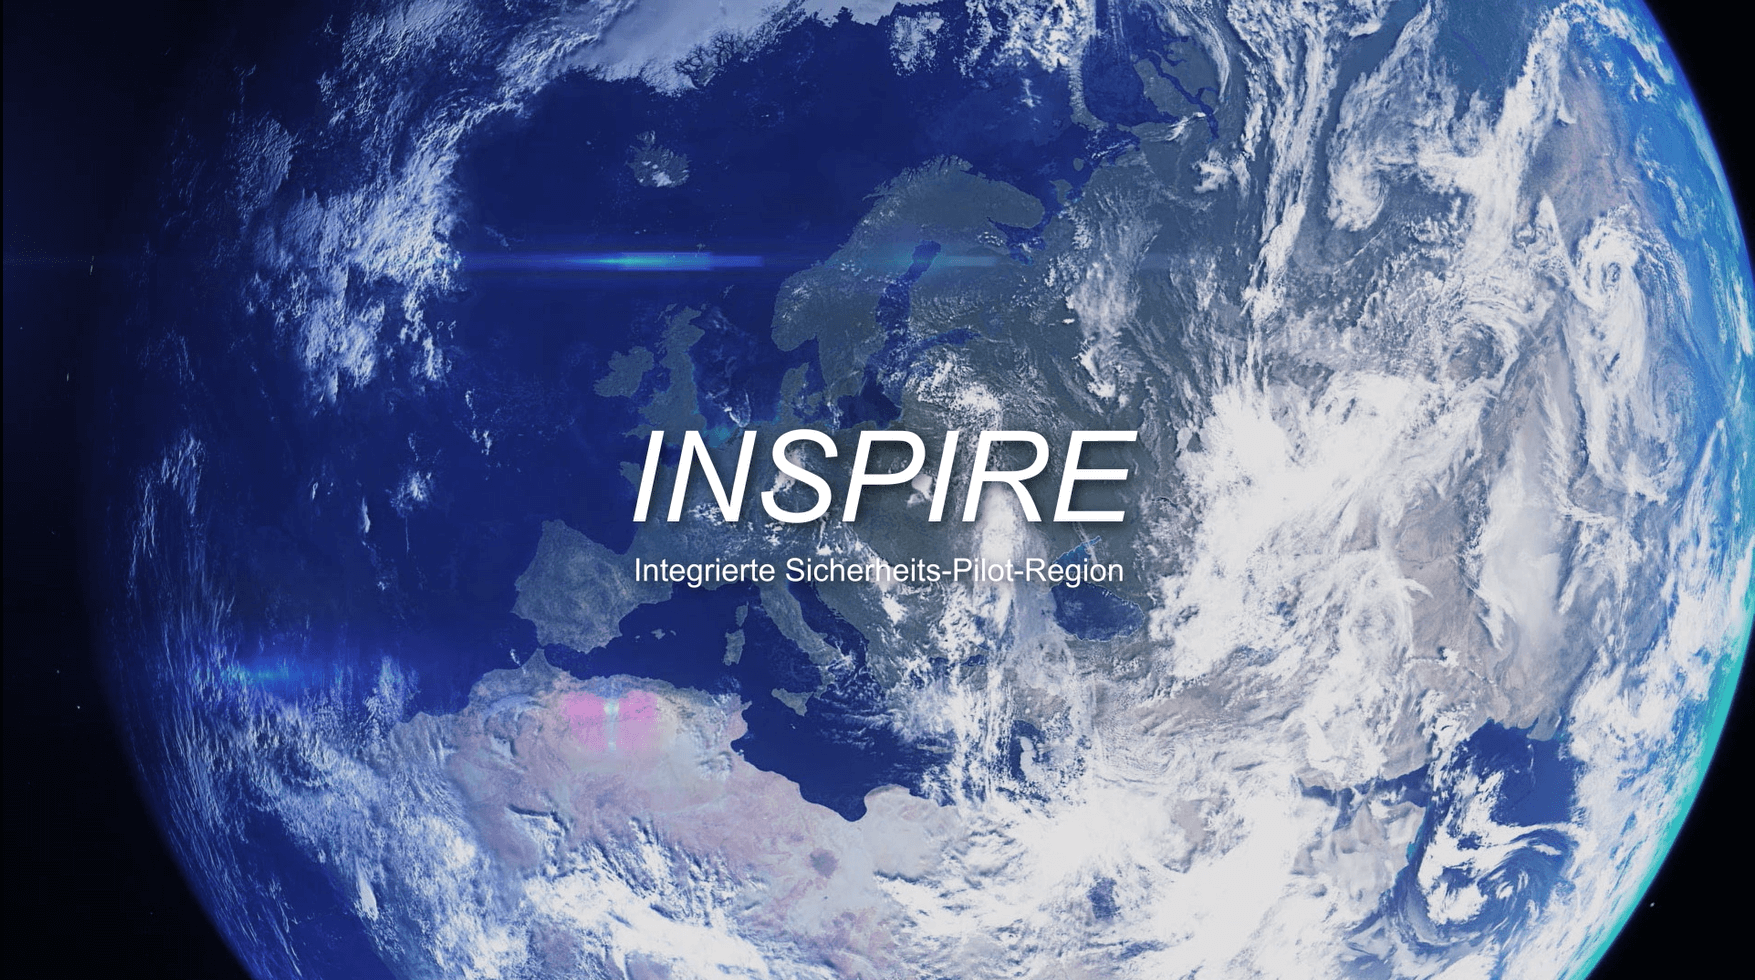 Our INSPIRE video is out!